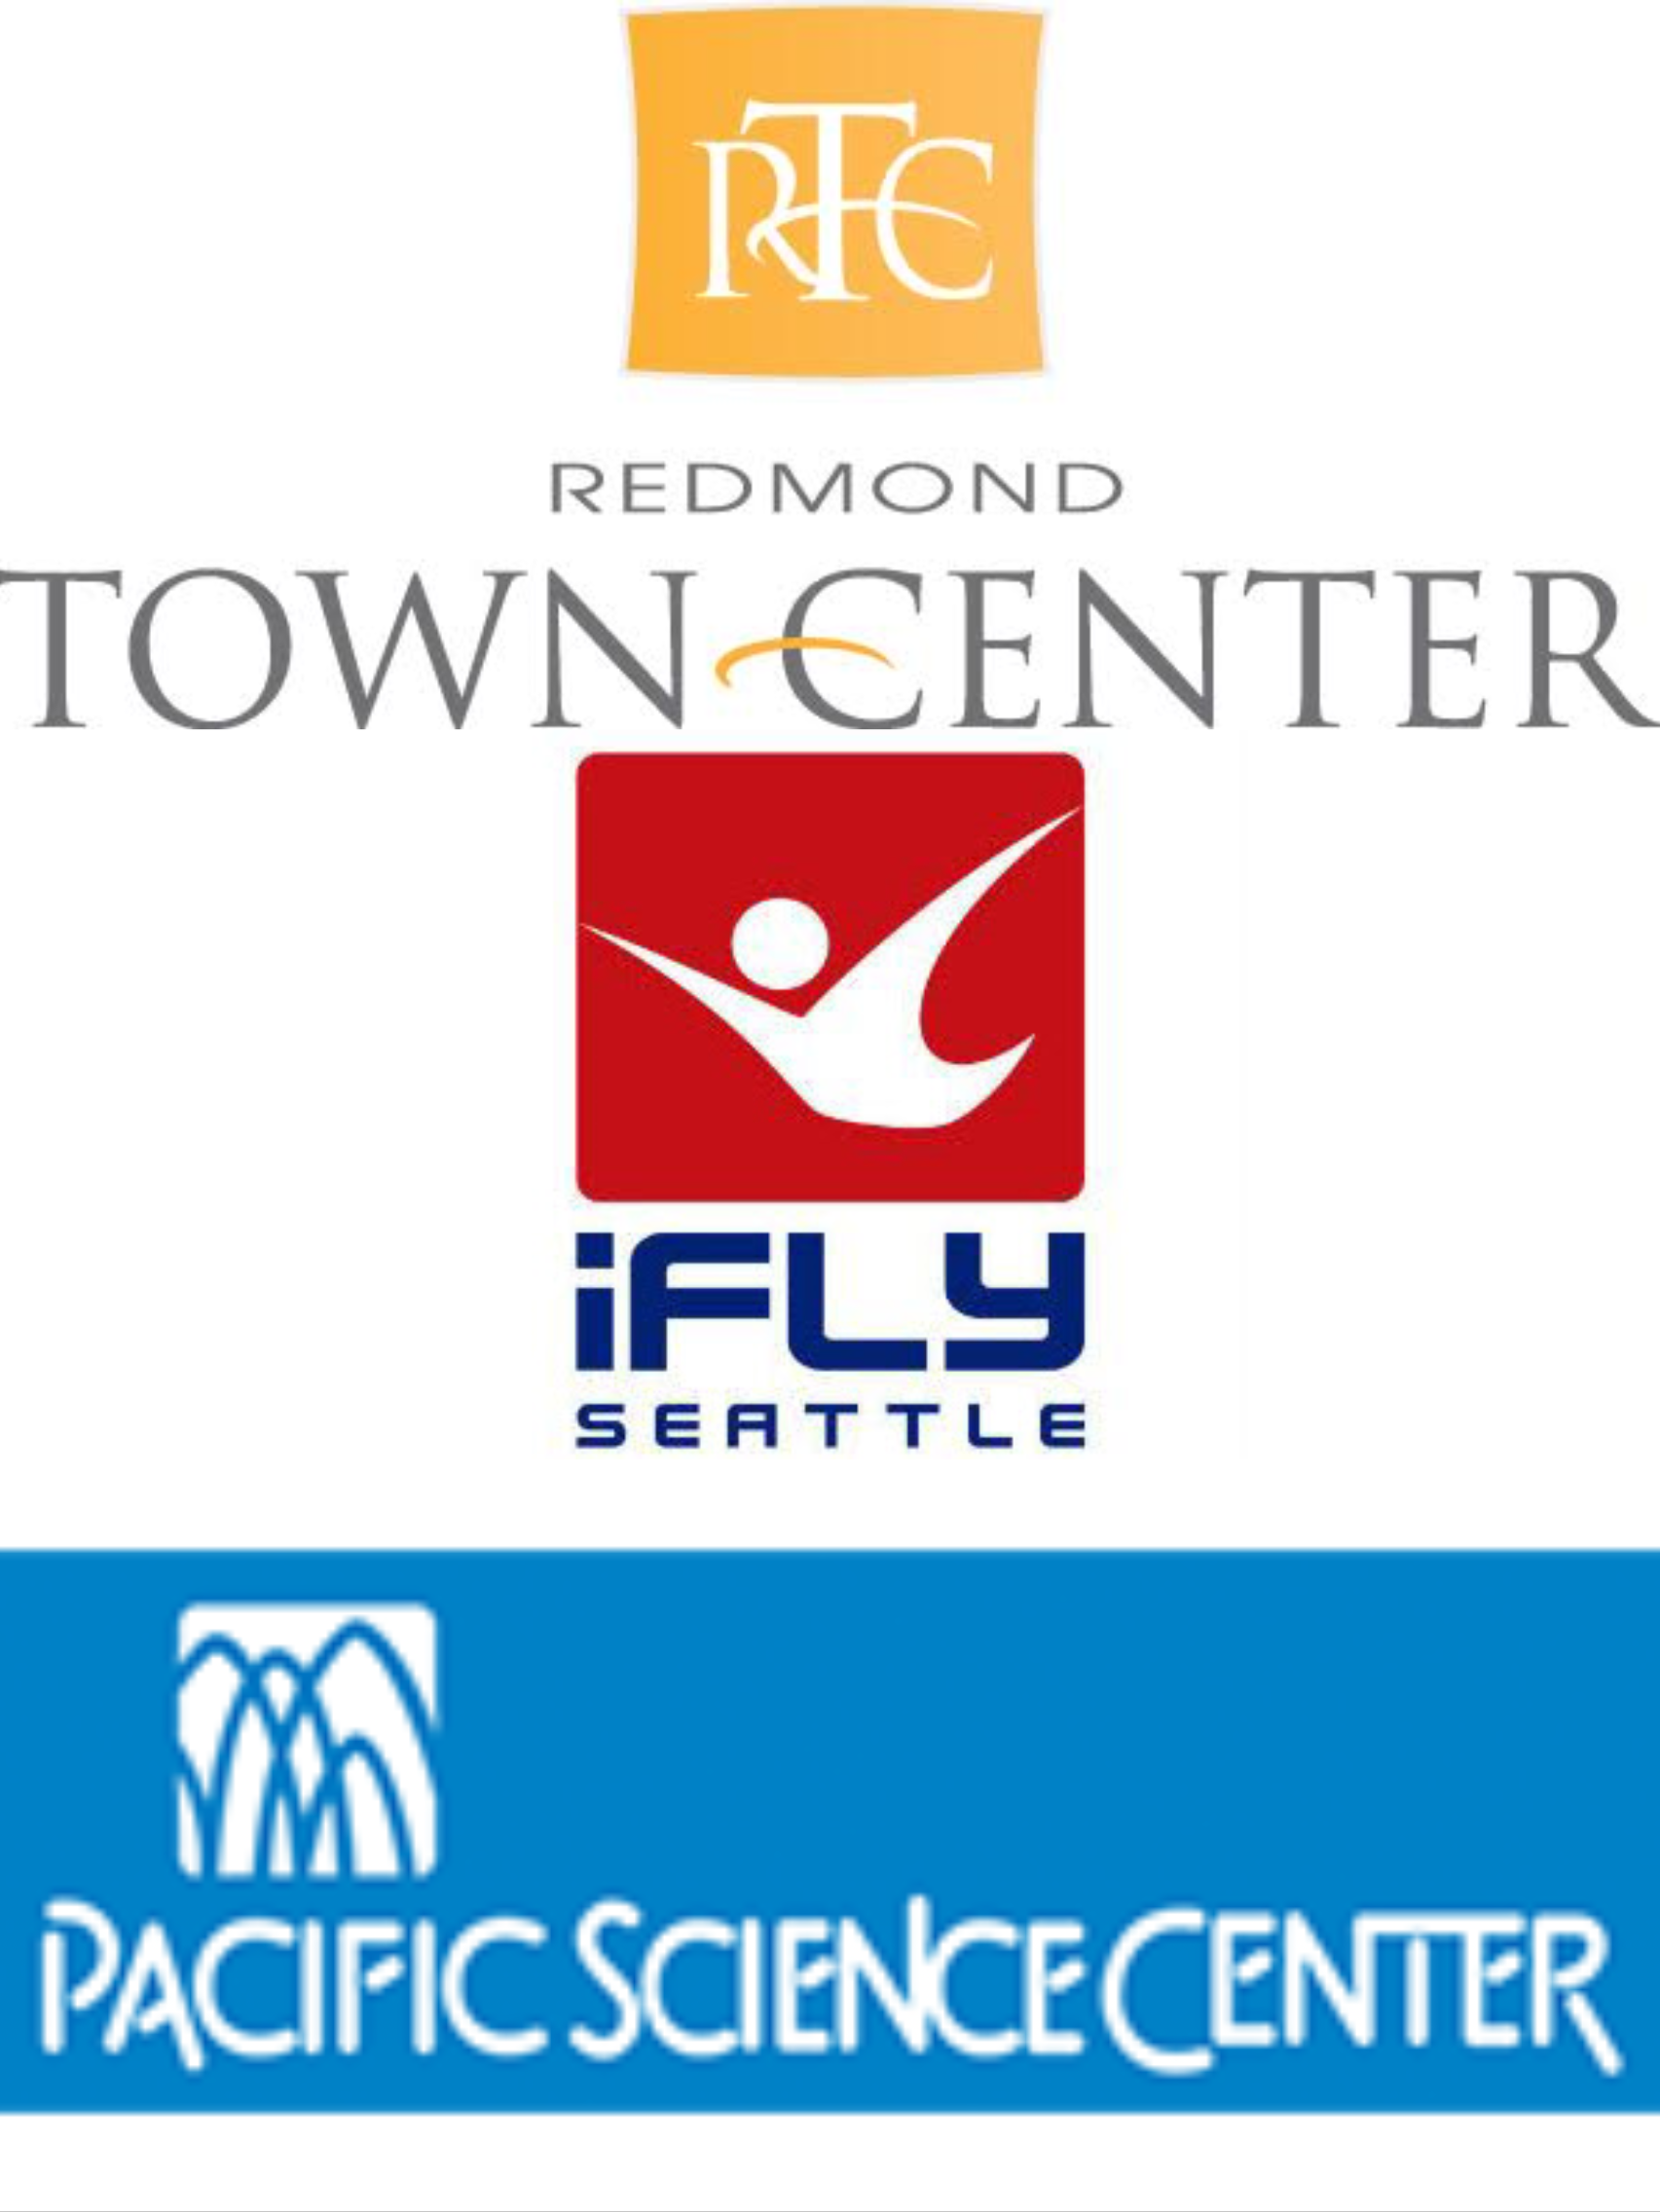 Prizes iFly, Pacific Science Center, Redmond Town Center Eggstravaganza